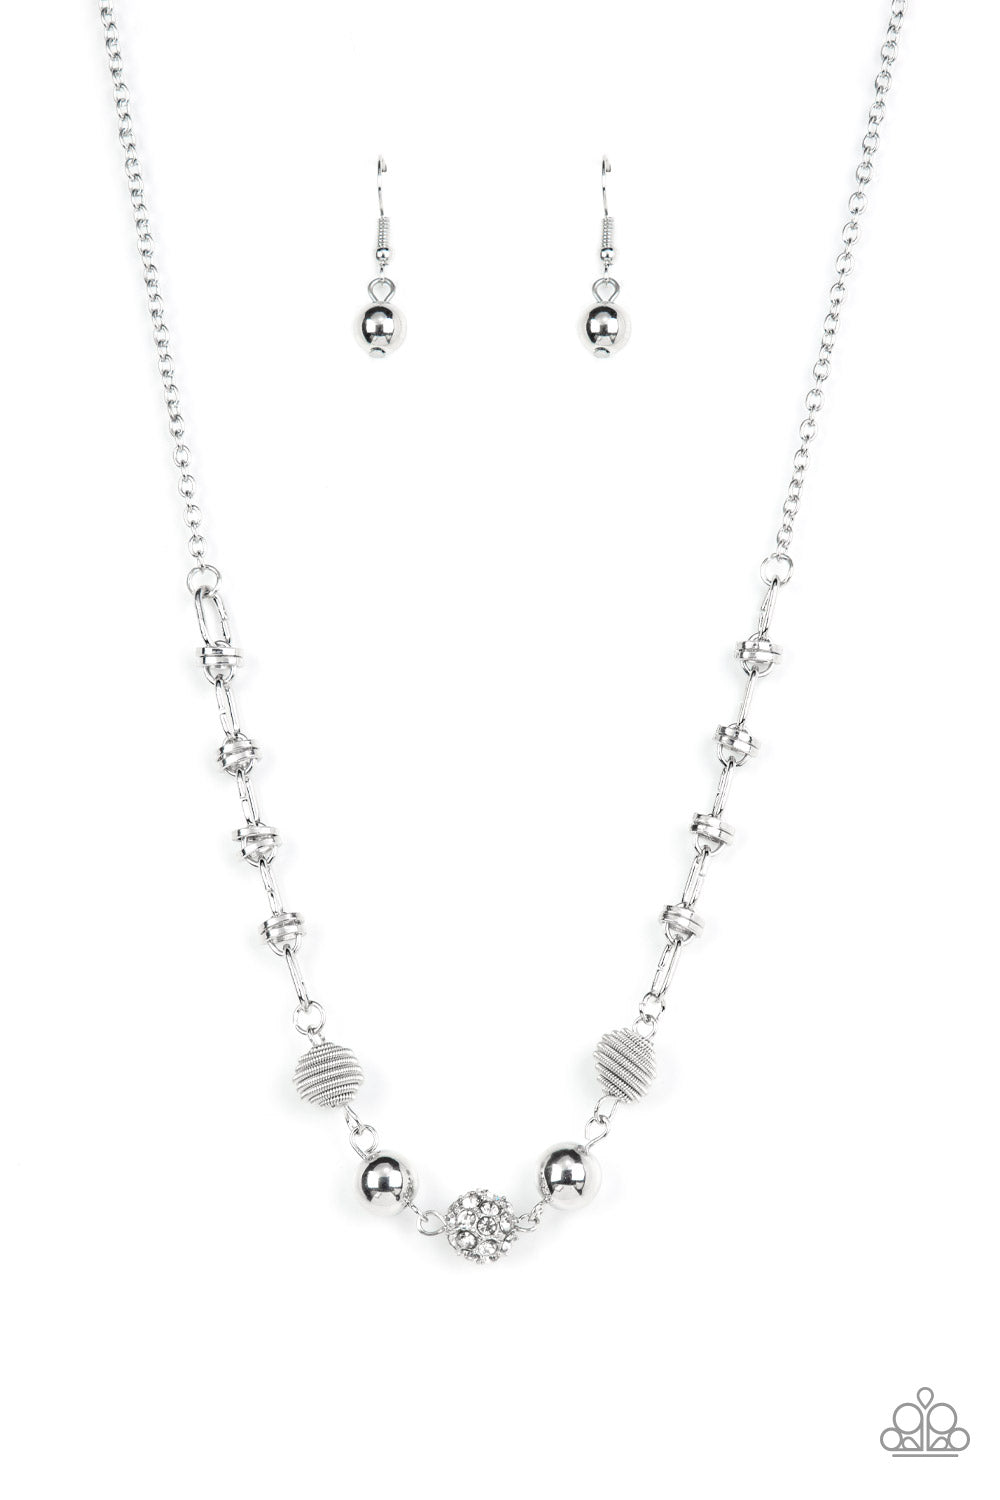 Taunting Twinkle Paparazzi Accessories Necklace with Earrings - White